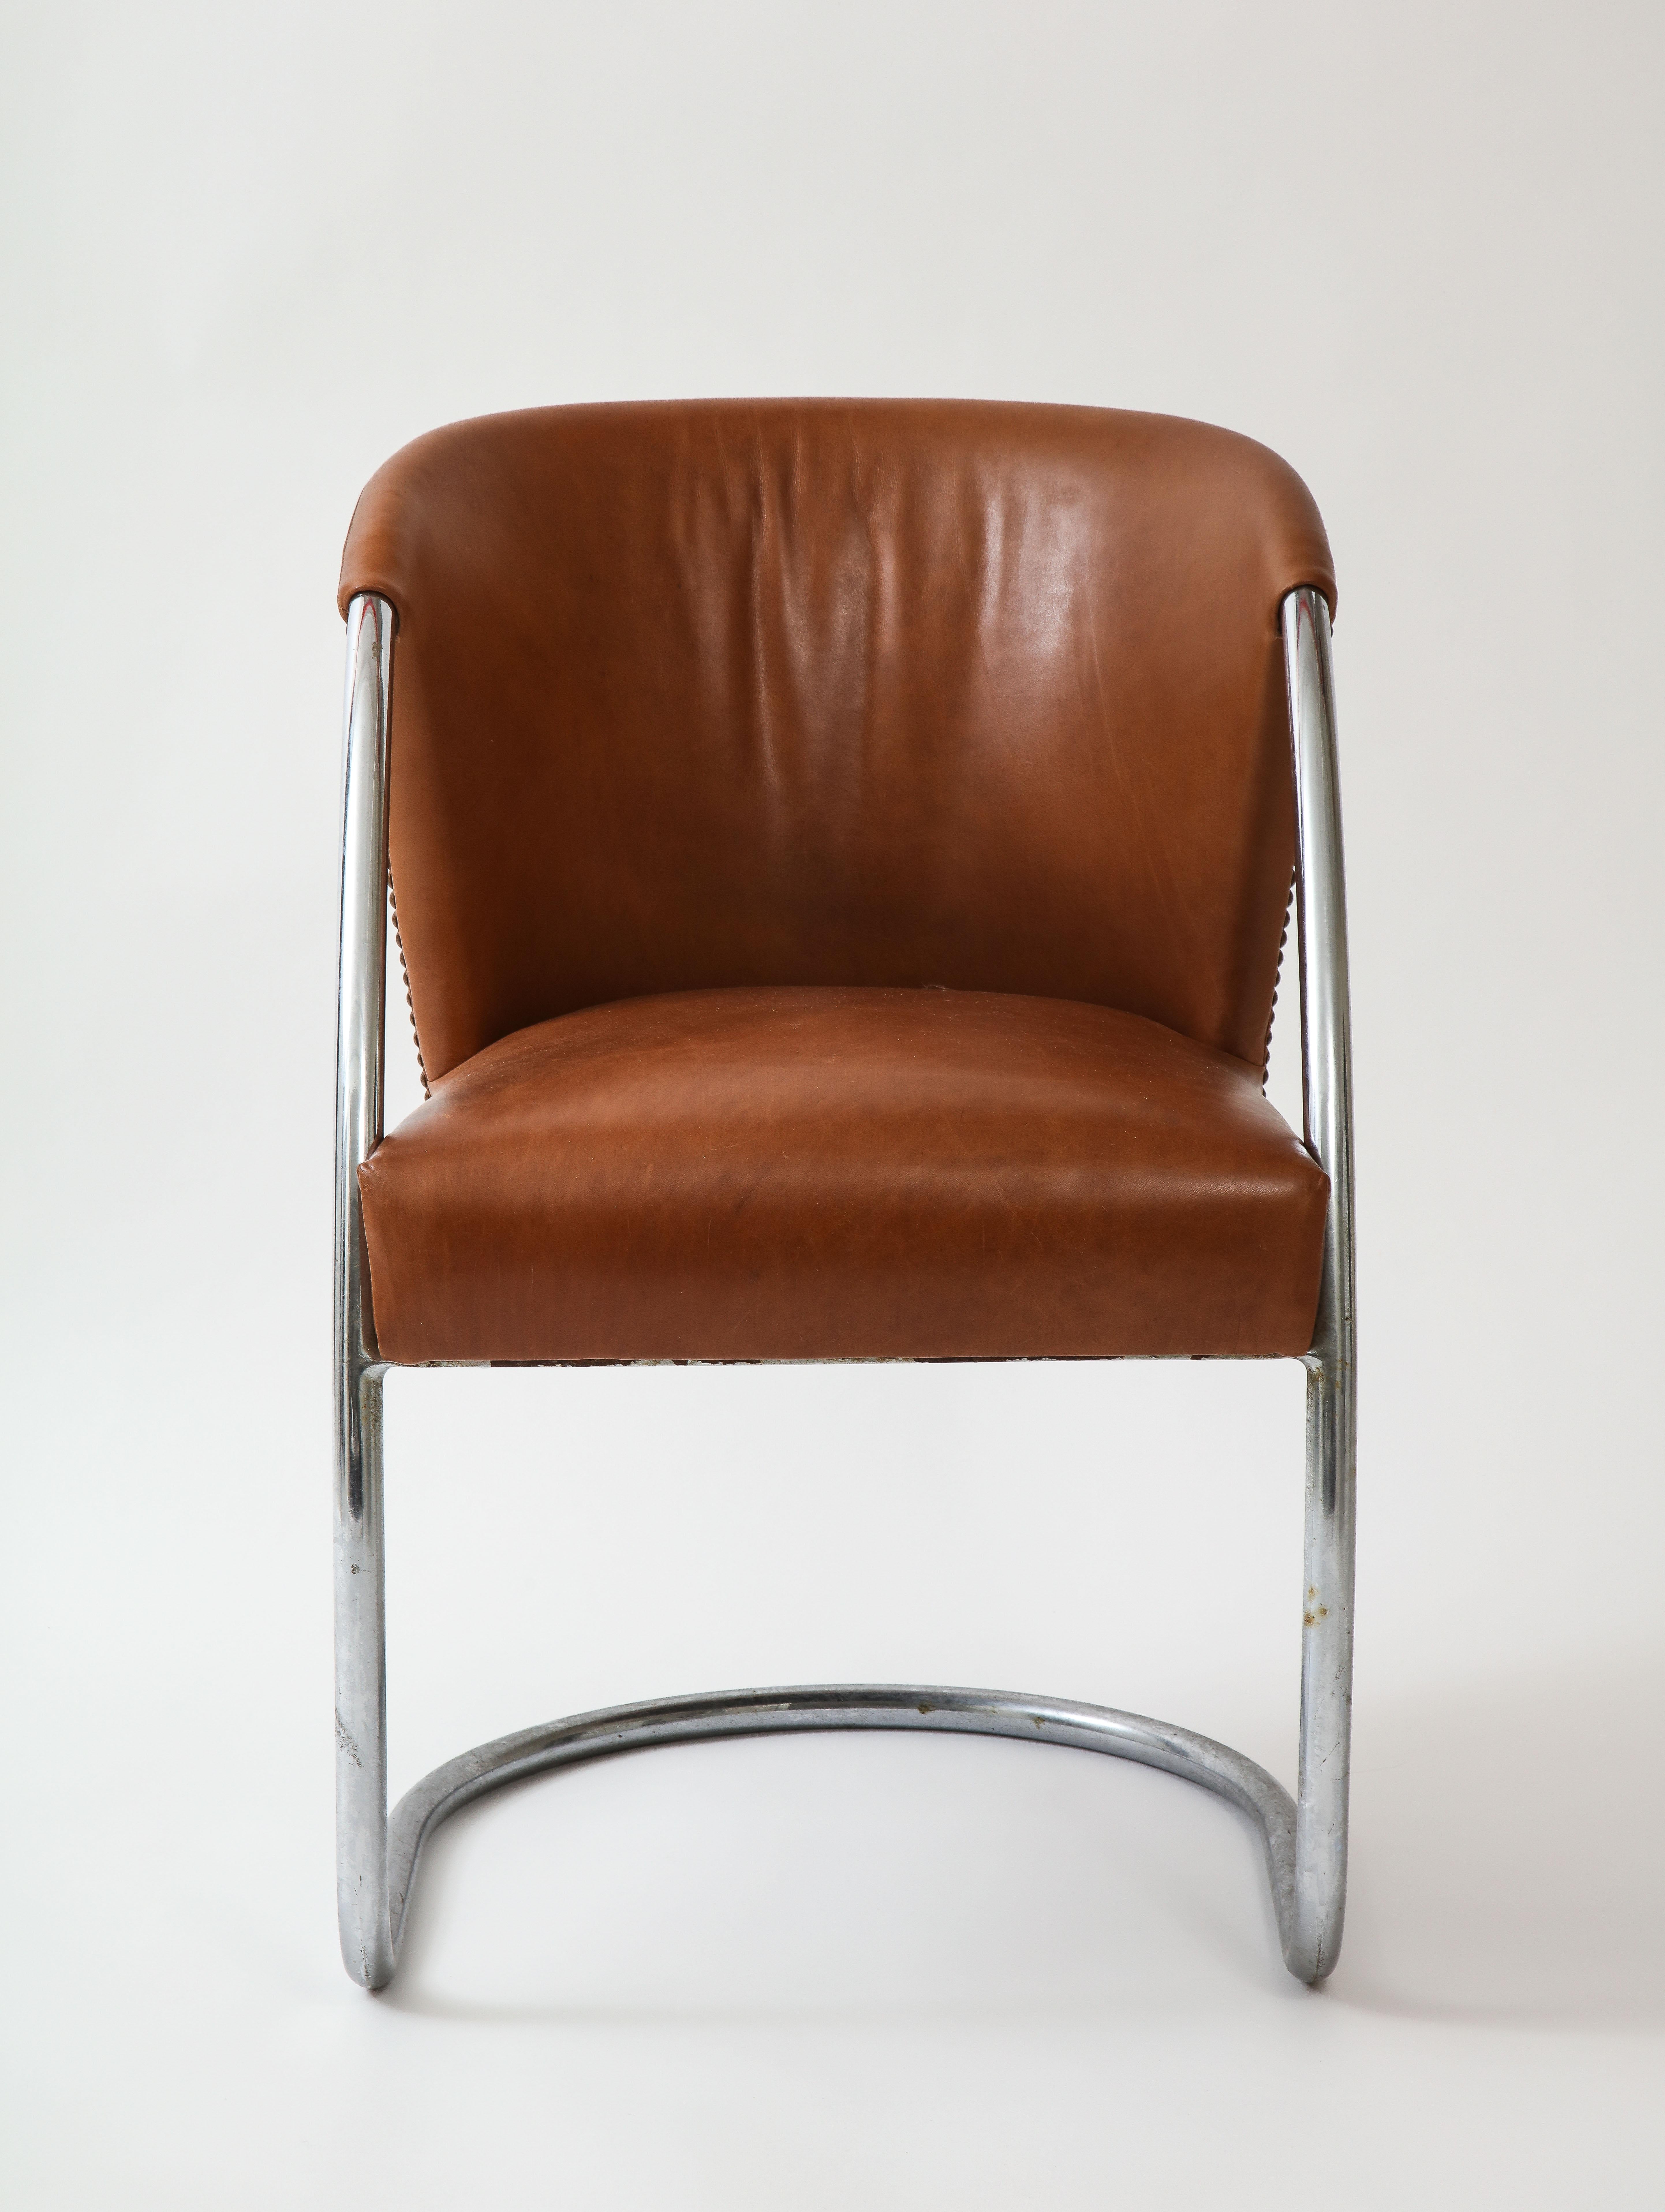 Midcentury Jacques Adnet set chrome chairs and table, France

Beautiful and chairs. The chairs have been reupholstered in brown leather. In overall good condition. 
Jacques Adnet (1900-1984): Rare modernist armchair in tubular chromed steel frame